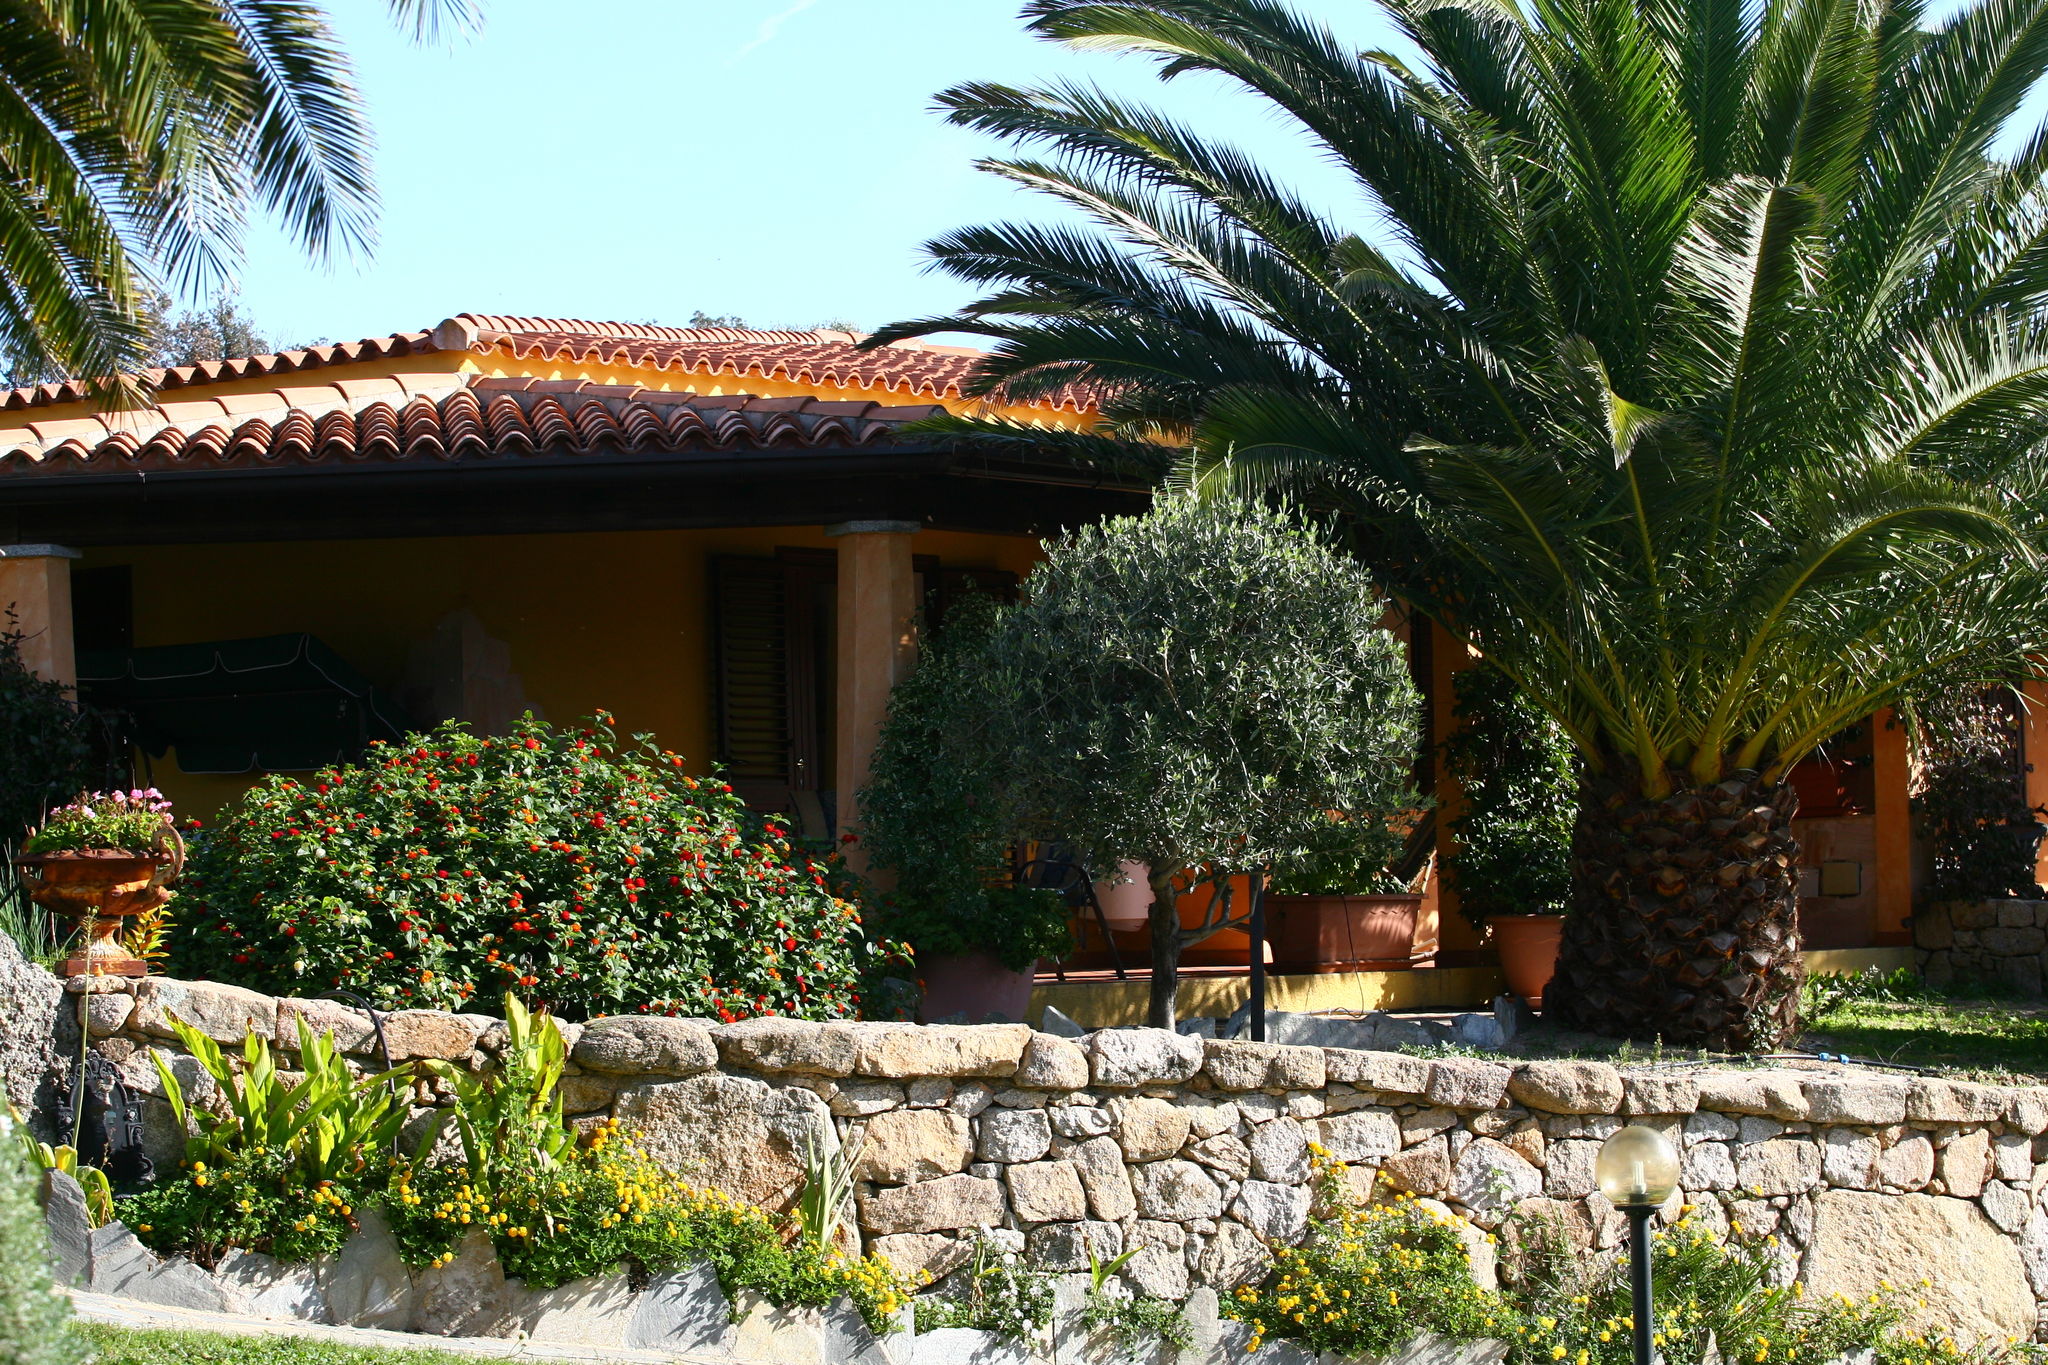 House with swimming pool,  in 3 hectares of Mediterranean scrub and fruit trees.